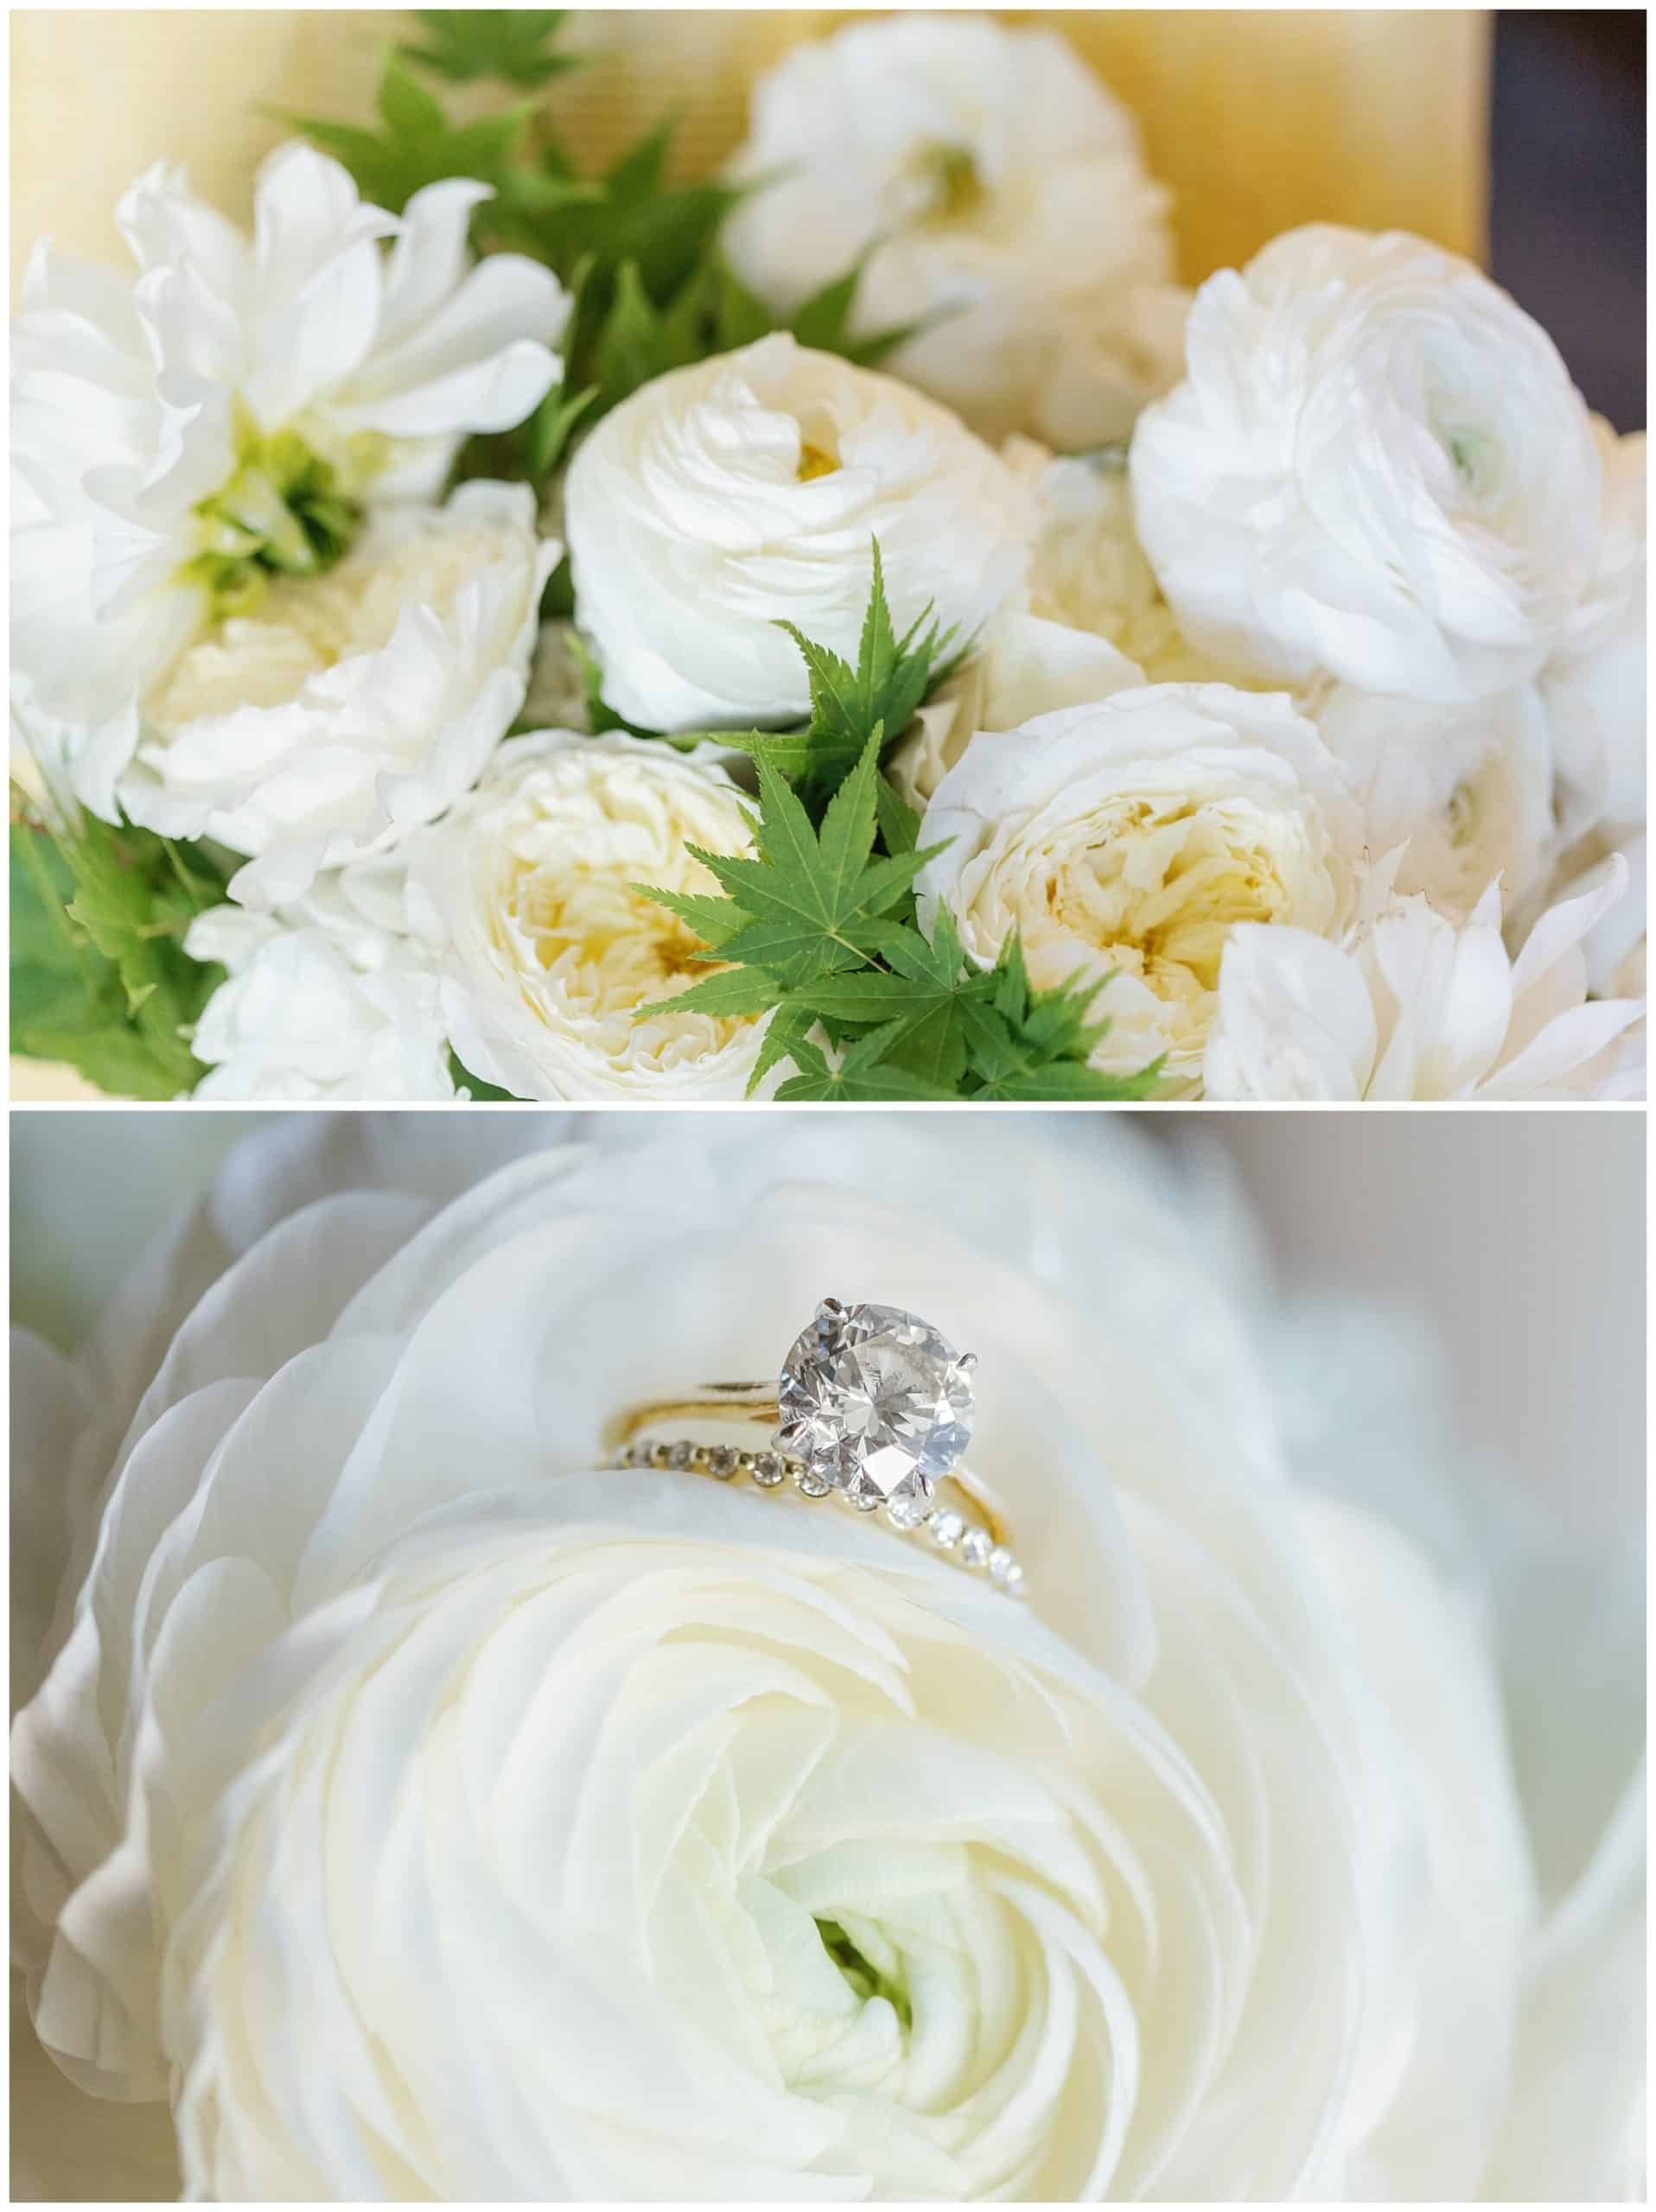 White wedding flowers with ring inside